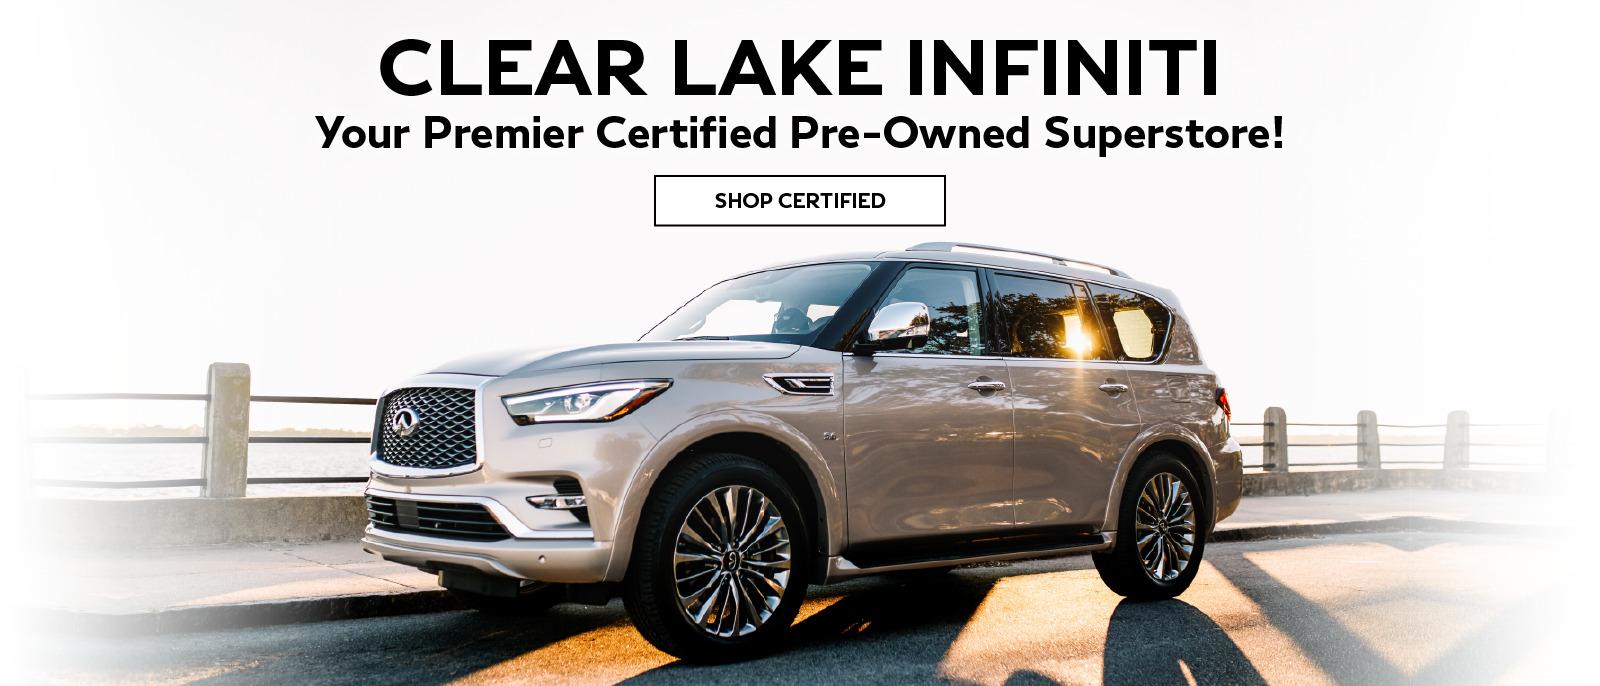 Clear Lake INFINITI is your premier certified pre-owned superstore! Click to shop certified inventory.